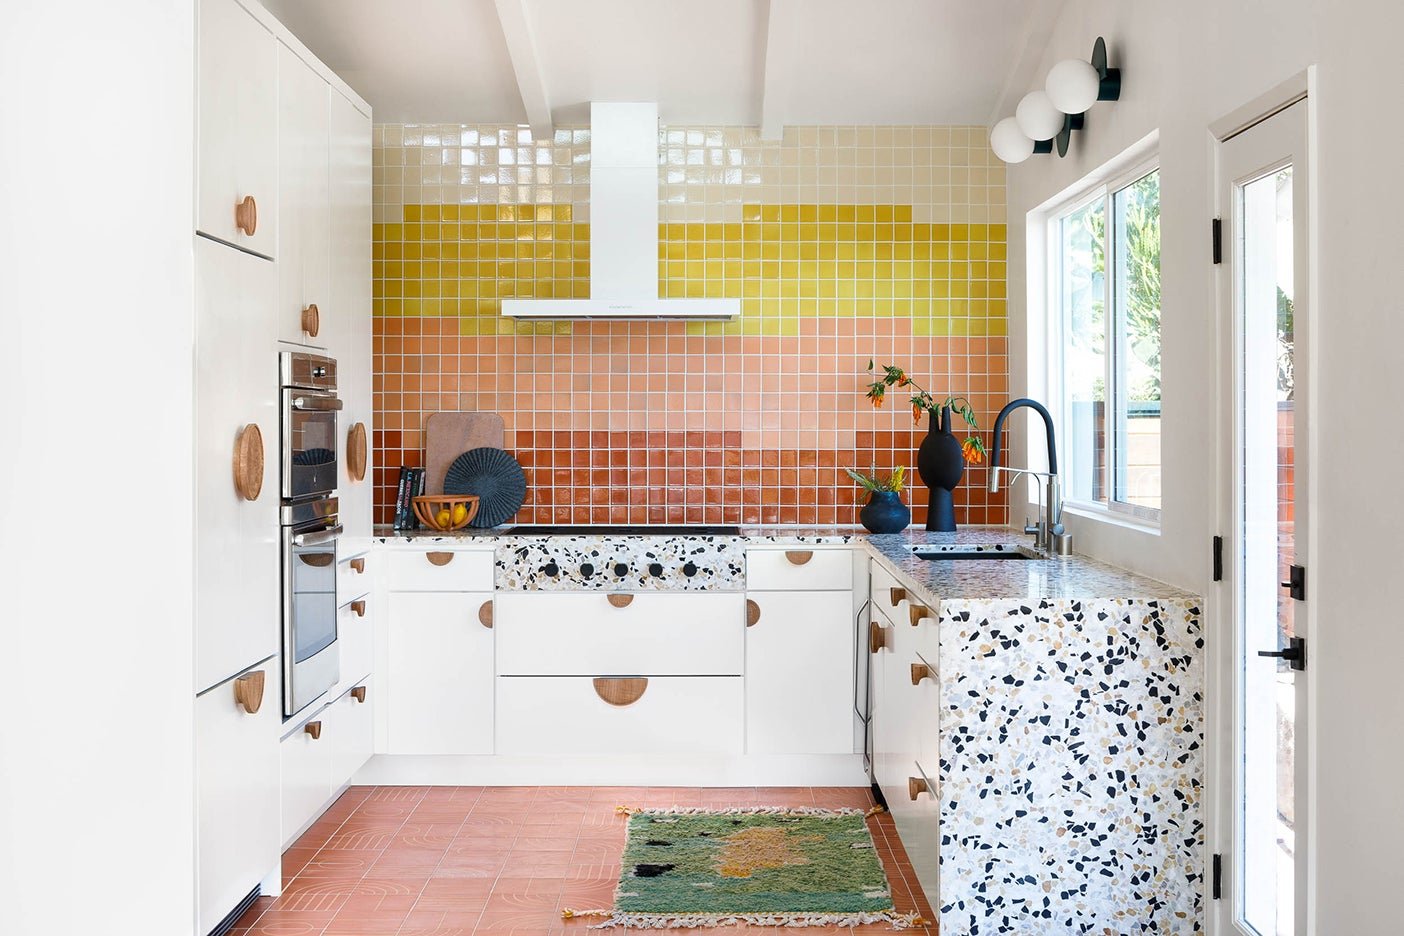 All the Biggest Design Trends in One Tiny U-Shaped Kitchen